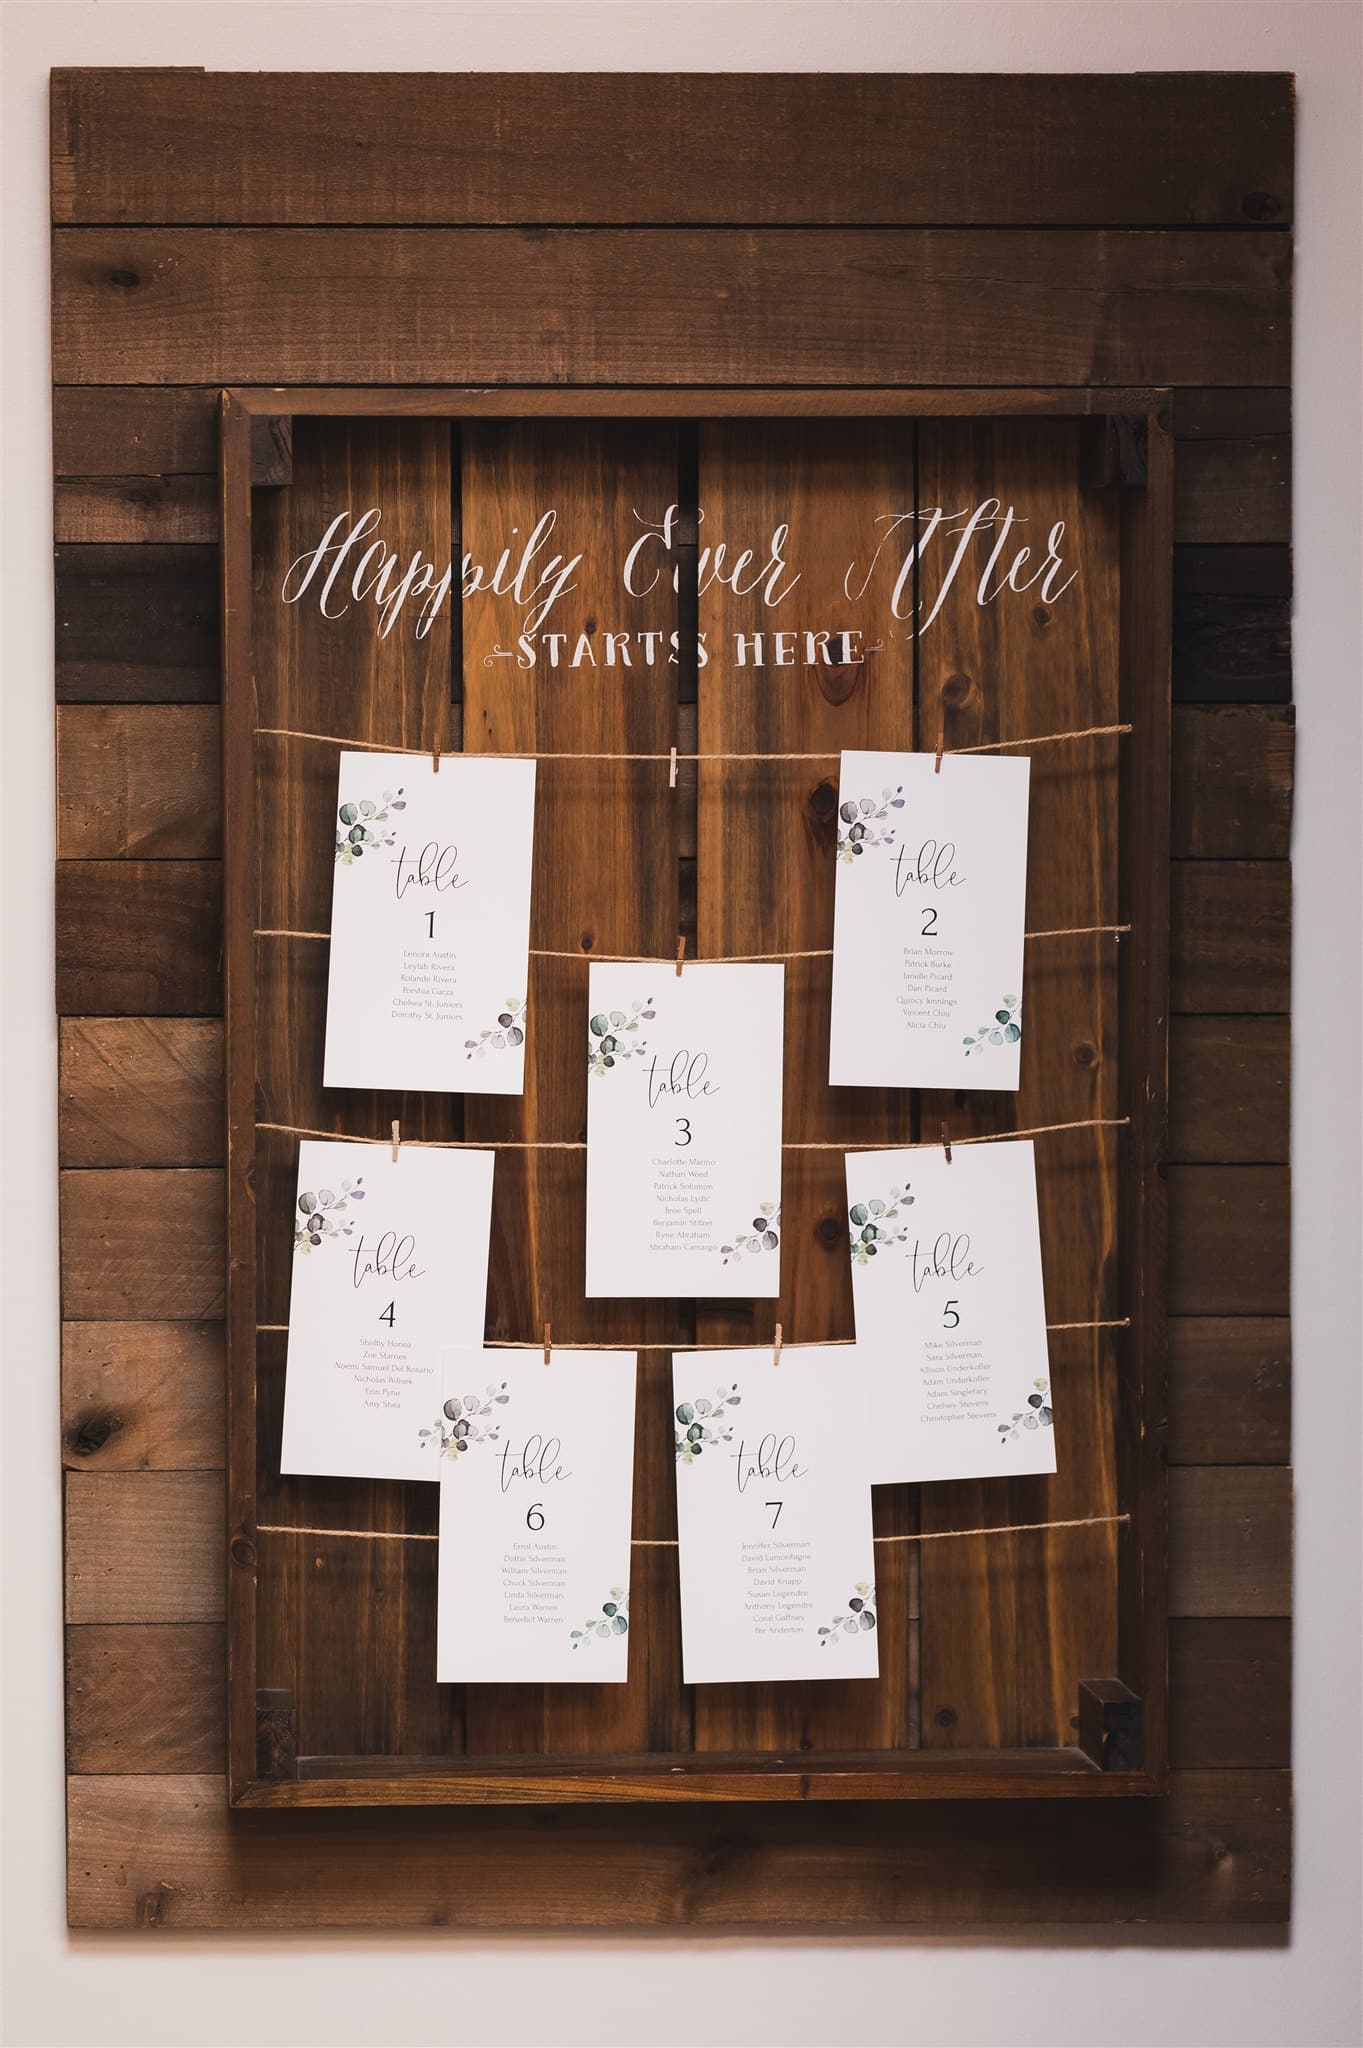 Seating chart for unique and stylish wedding at Trellis 925 that reads "Happily ever After starts here"